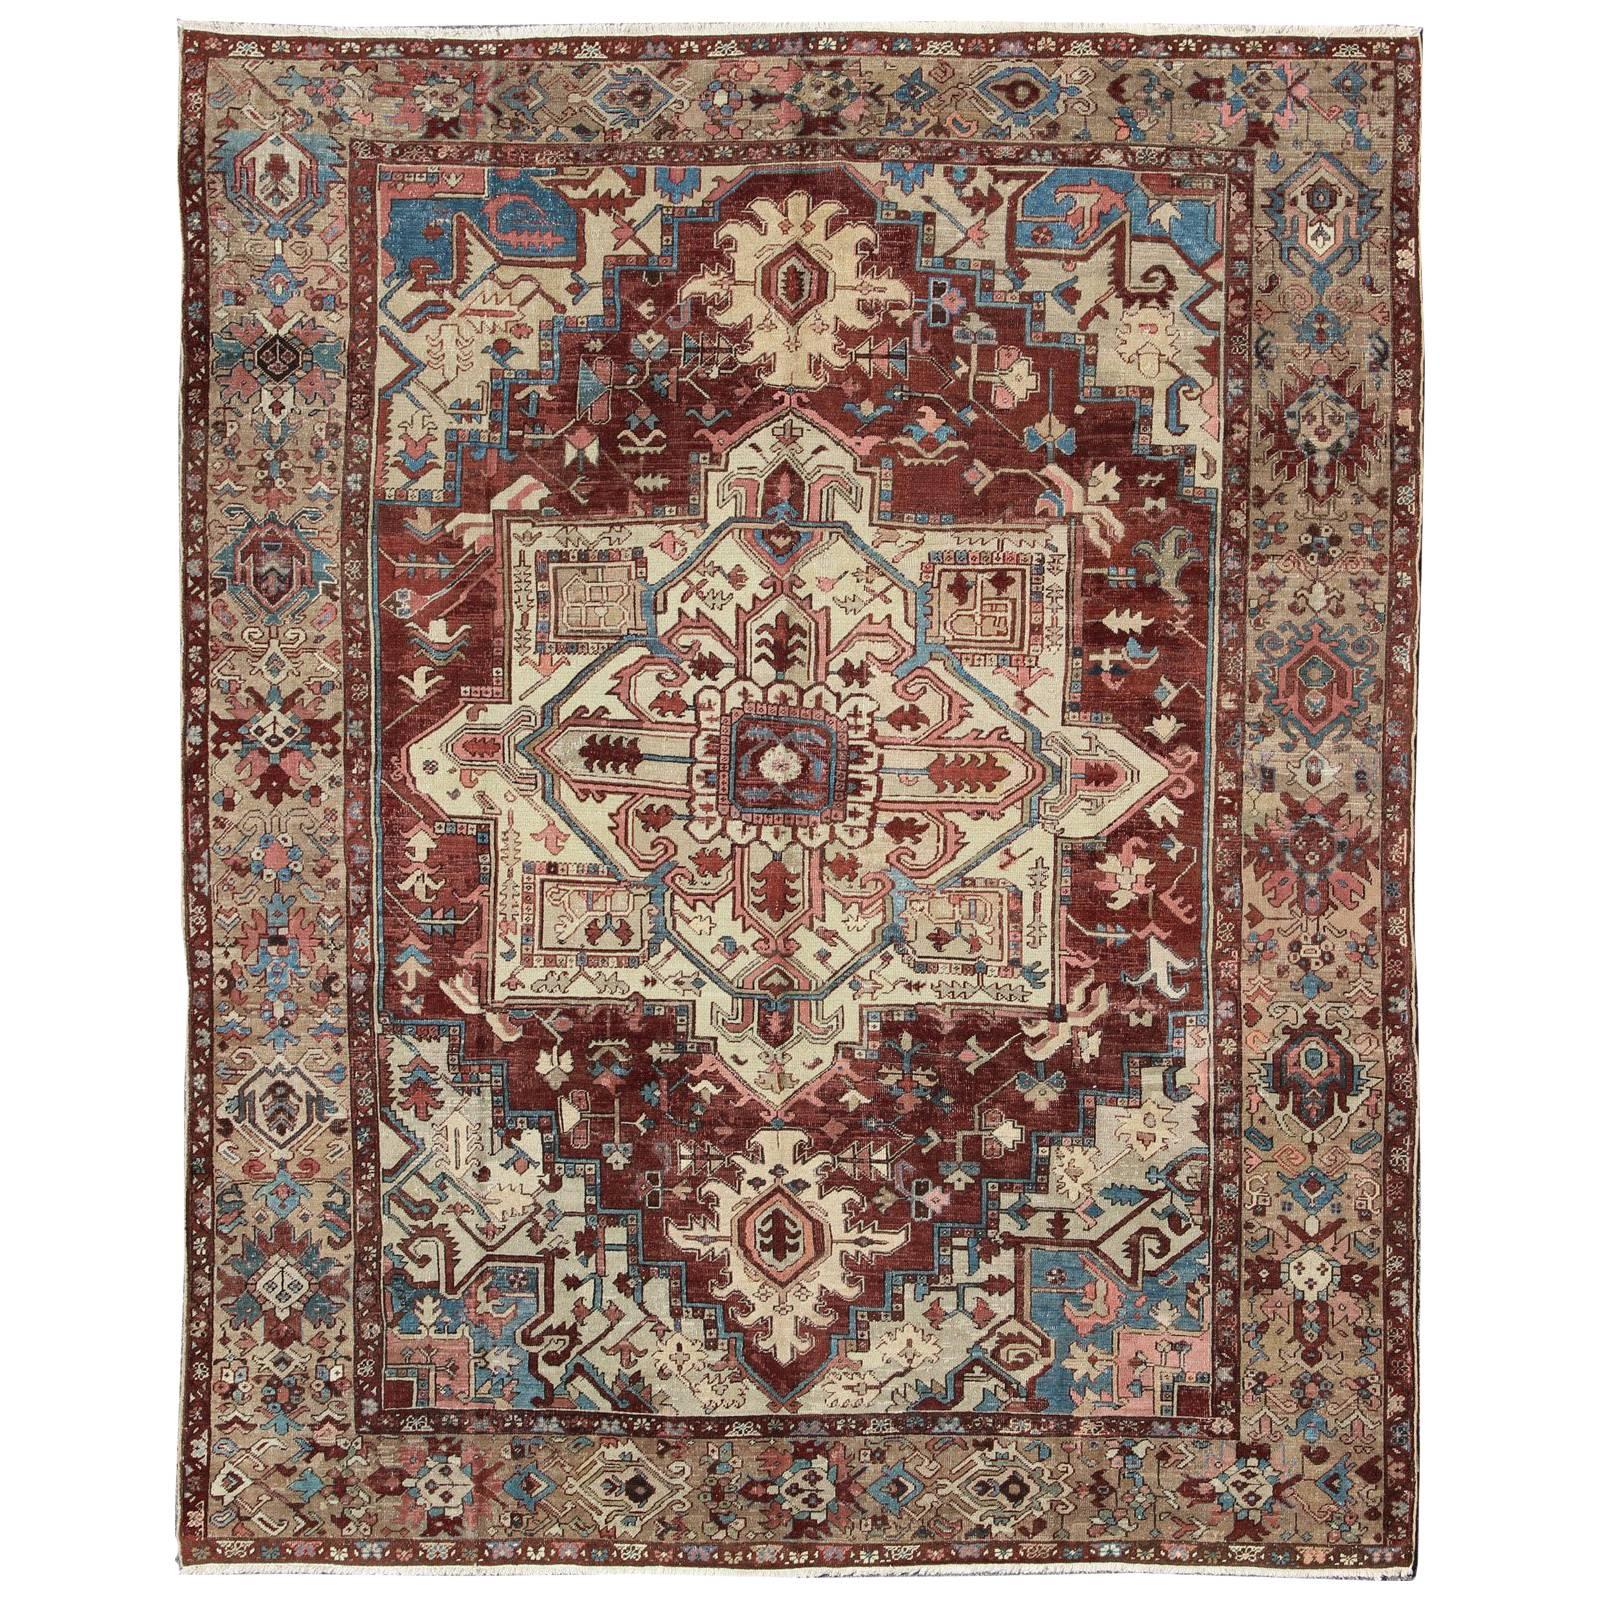 Antique Persian Serapi Carpet With Medallion In Reddish Brown Tan and Light Blue For Sale